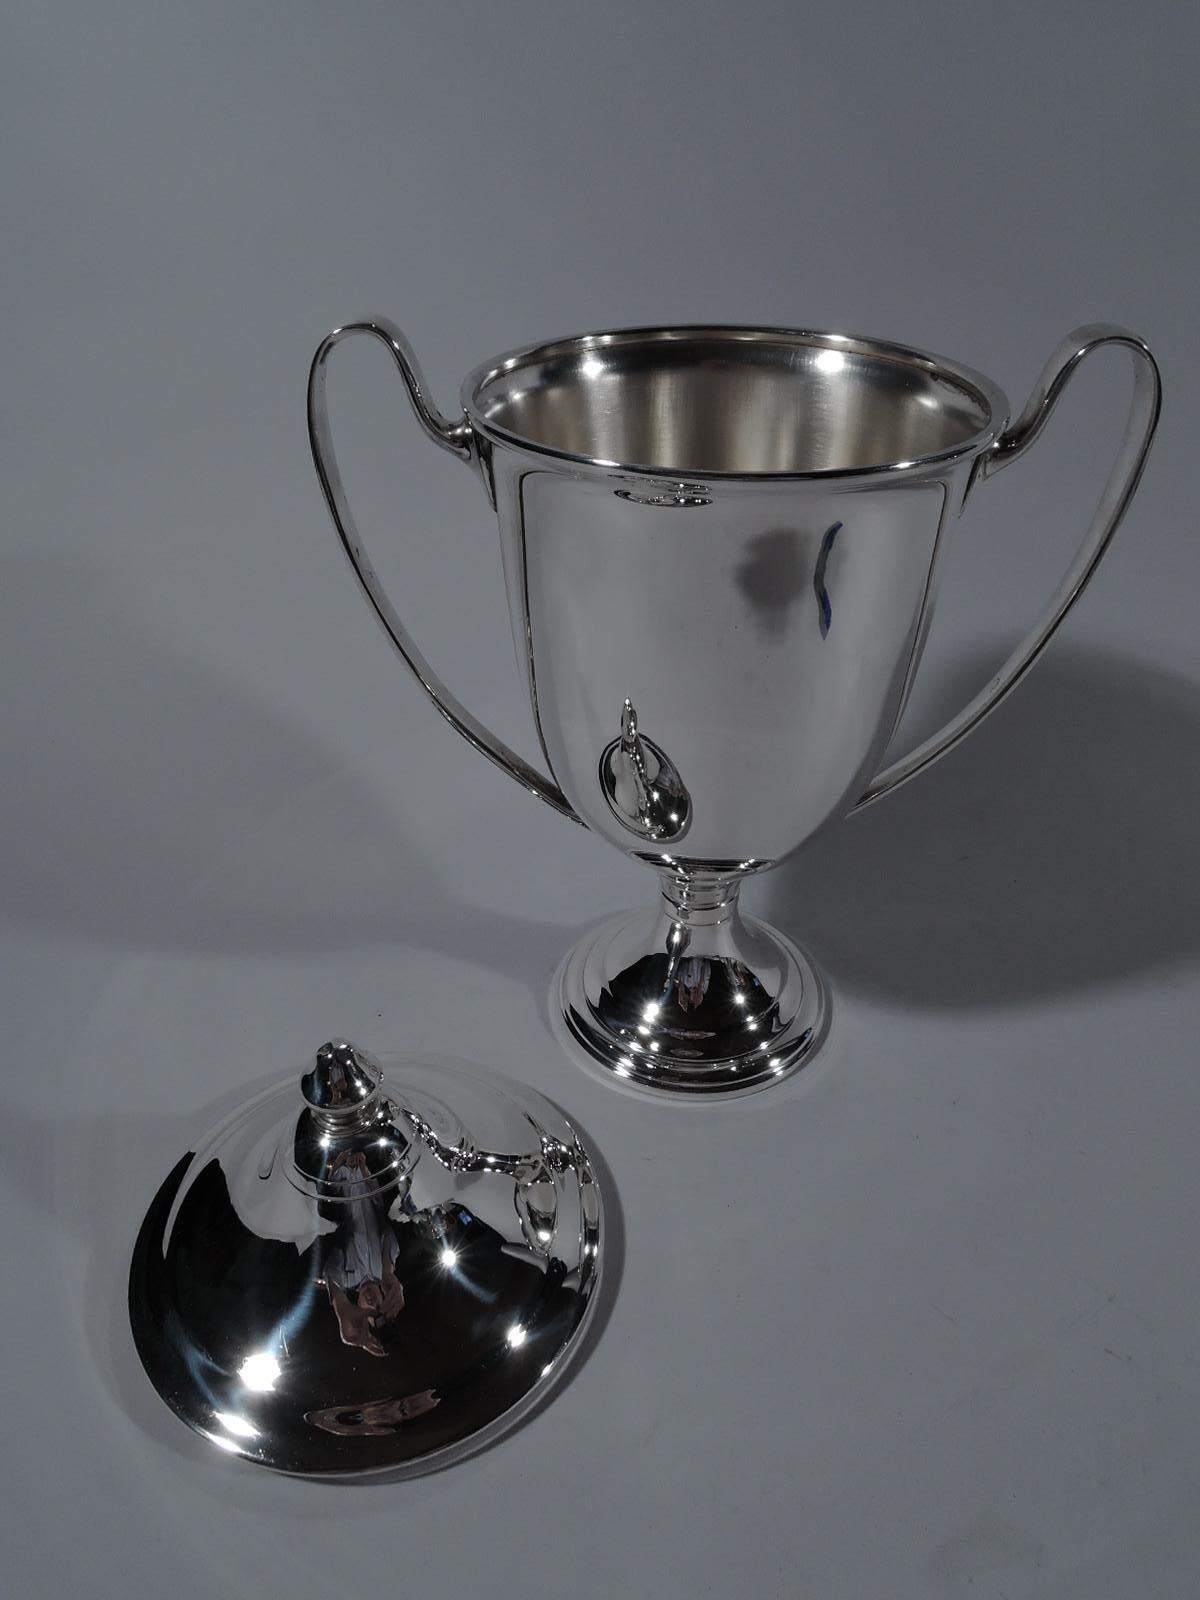 Classical sterling silver trophy cup. Traditional amphora urn with high-looping side handles and stepped and raised foot. Cover domed with engraved bands and acorn finial. A nice cup with lots of room for engraving. Marked “Sterling / By / Fina”.